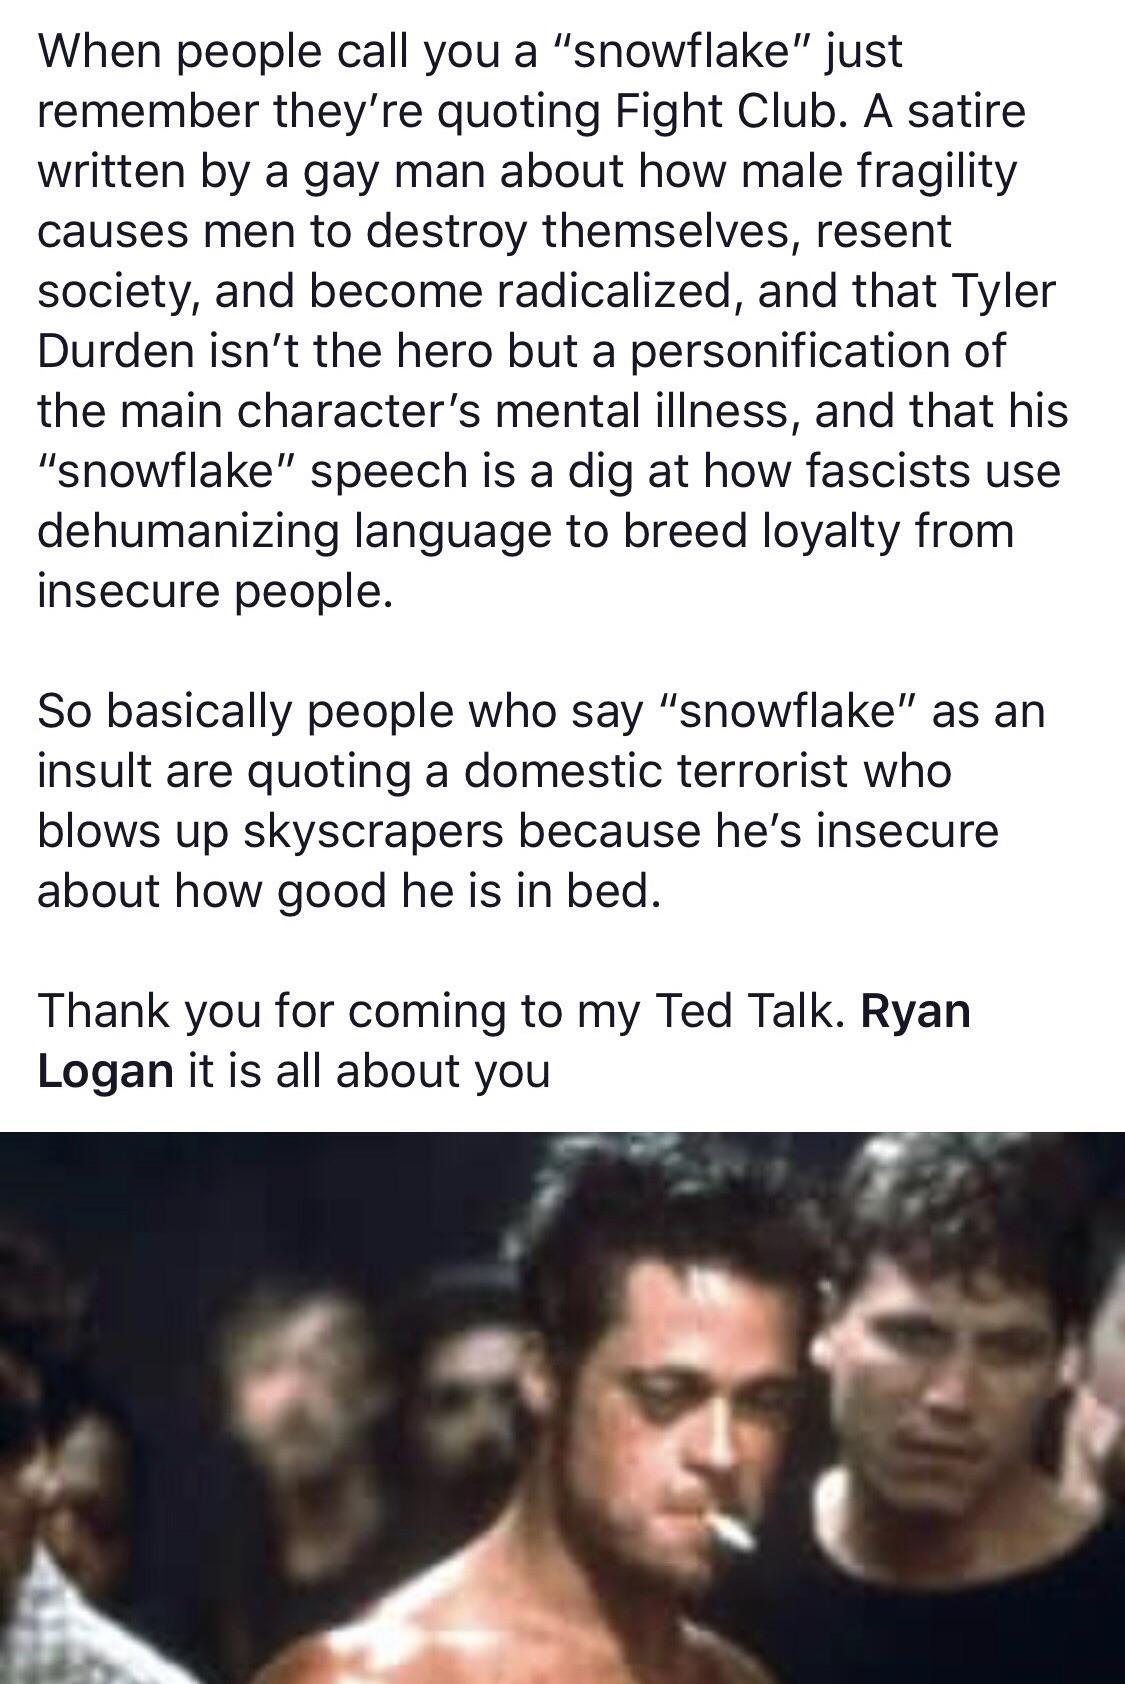 fight club brad pitt - When people call you a "snowflake" just remember they're quoting Fight Club. A satire written by a gay man about how male fragility causes men to destroy themselves, resent society, and become radicalized, and that Tyler Durden isn'